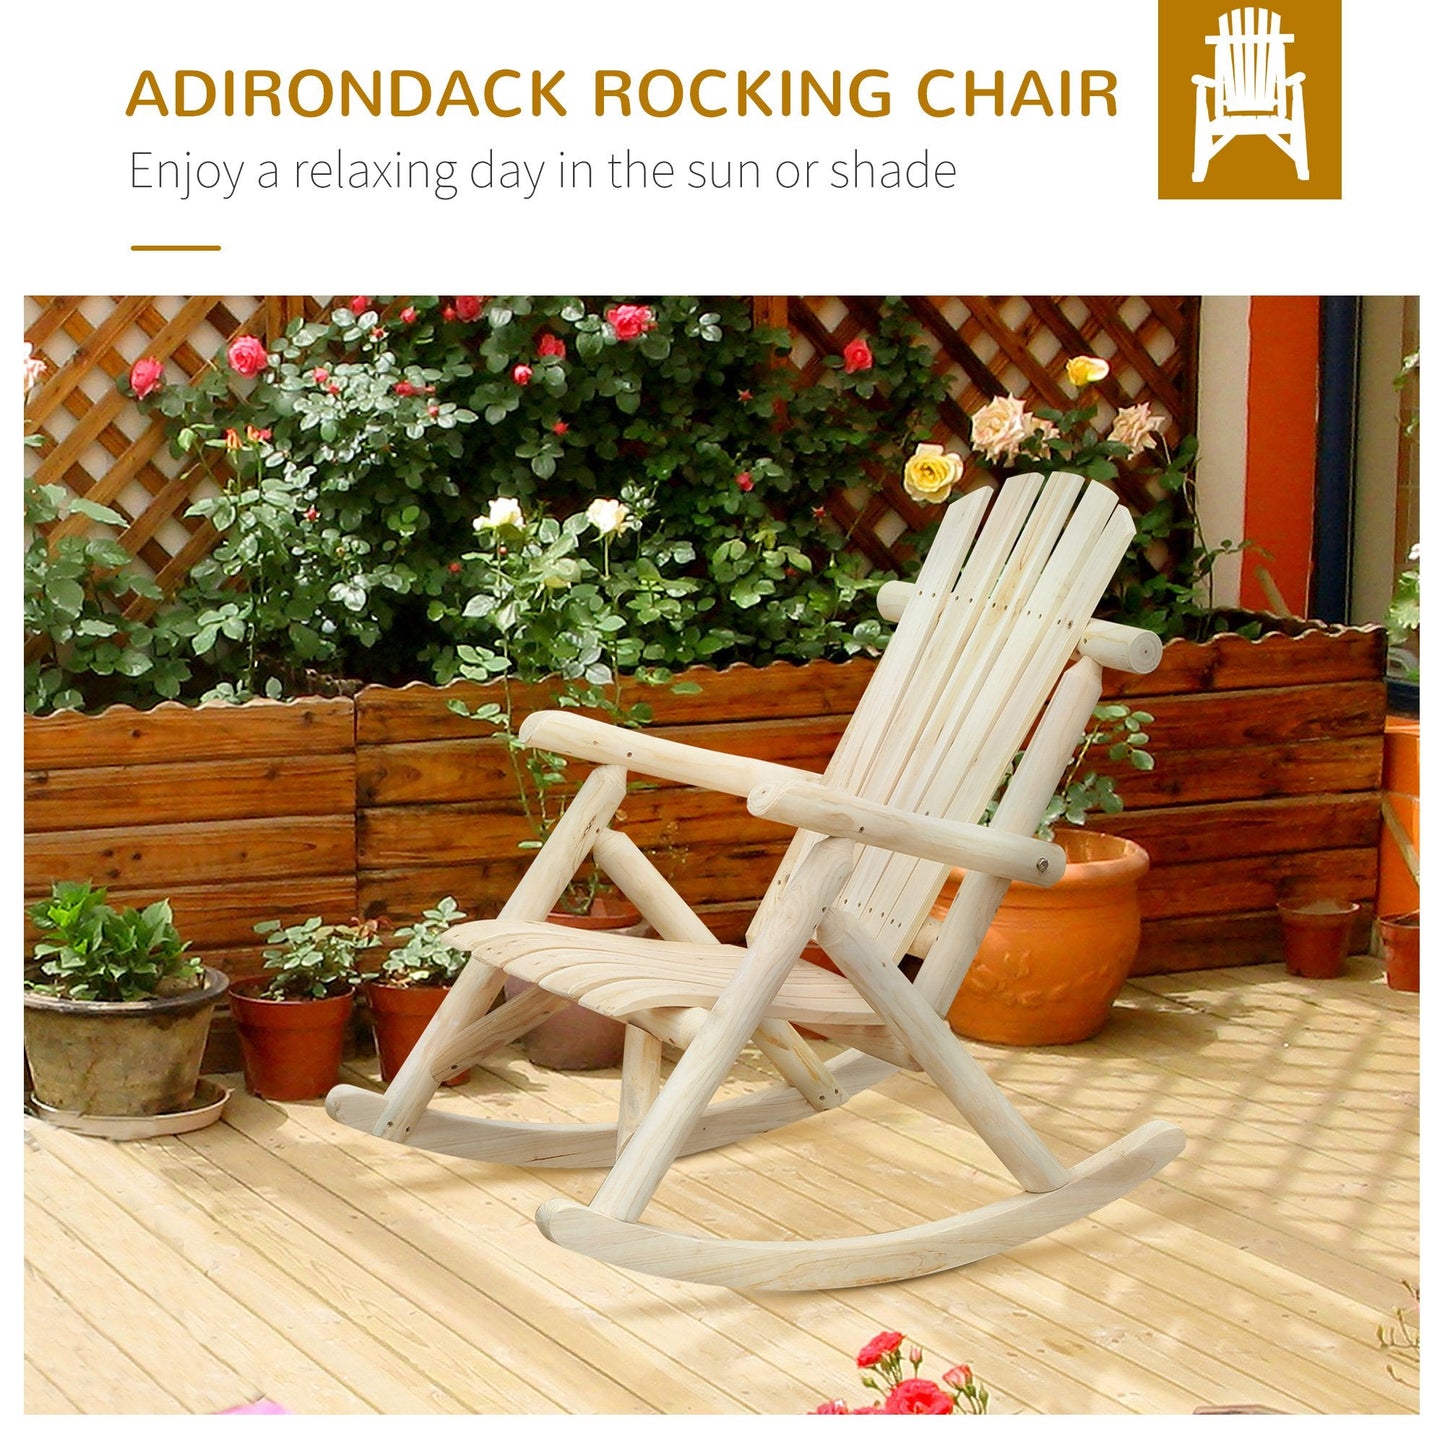 Outdoor and Garden-2 Piece Wooden Adirondack Rocking Chair Set, Outdoor Rustic Log Rocker with Slatted Design for Patio, Burlywood - Outdoor Style Company